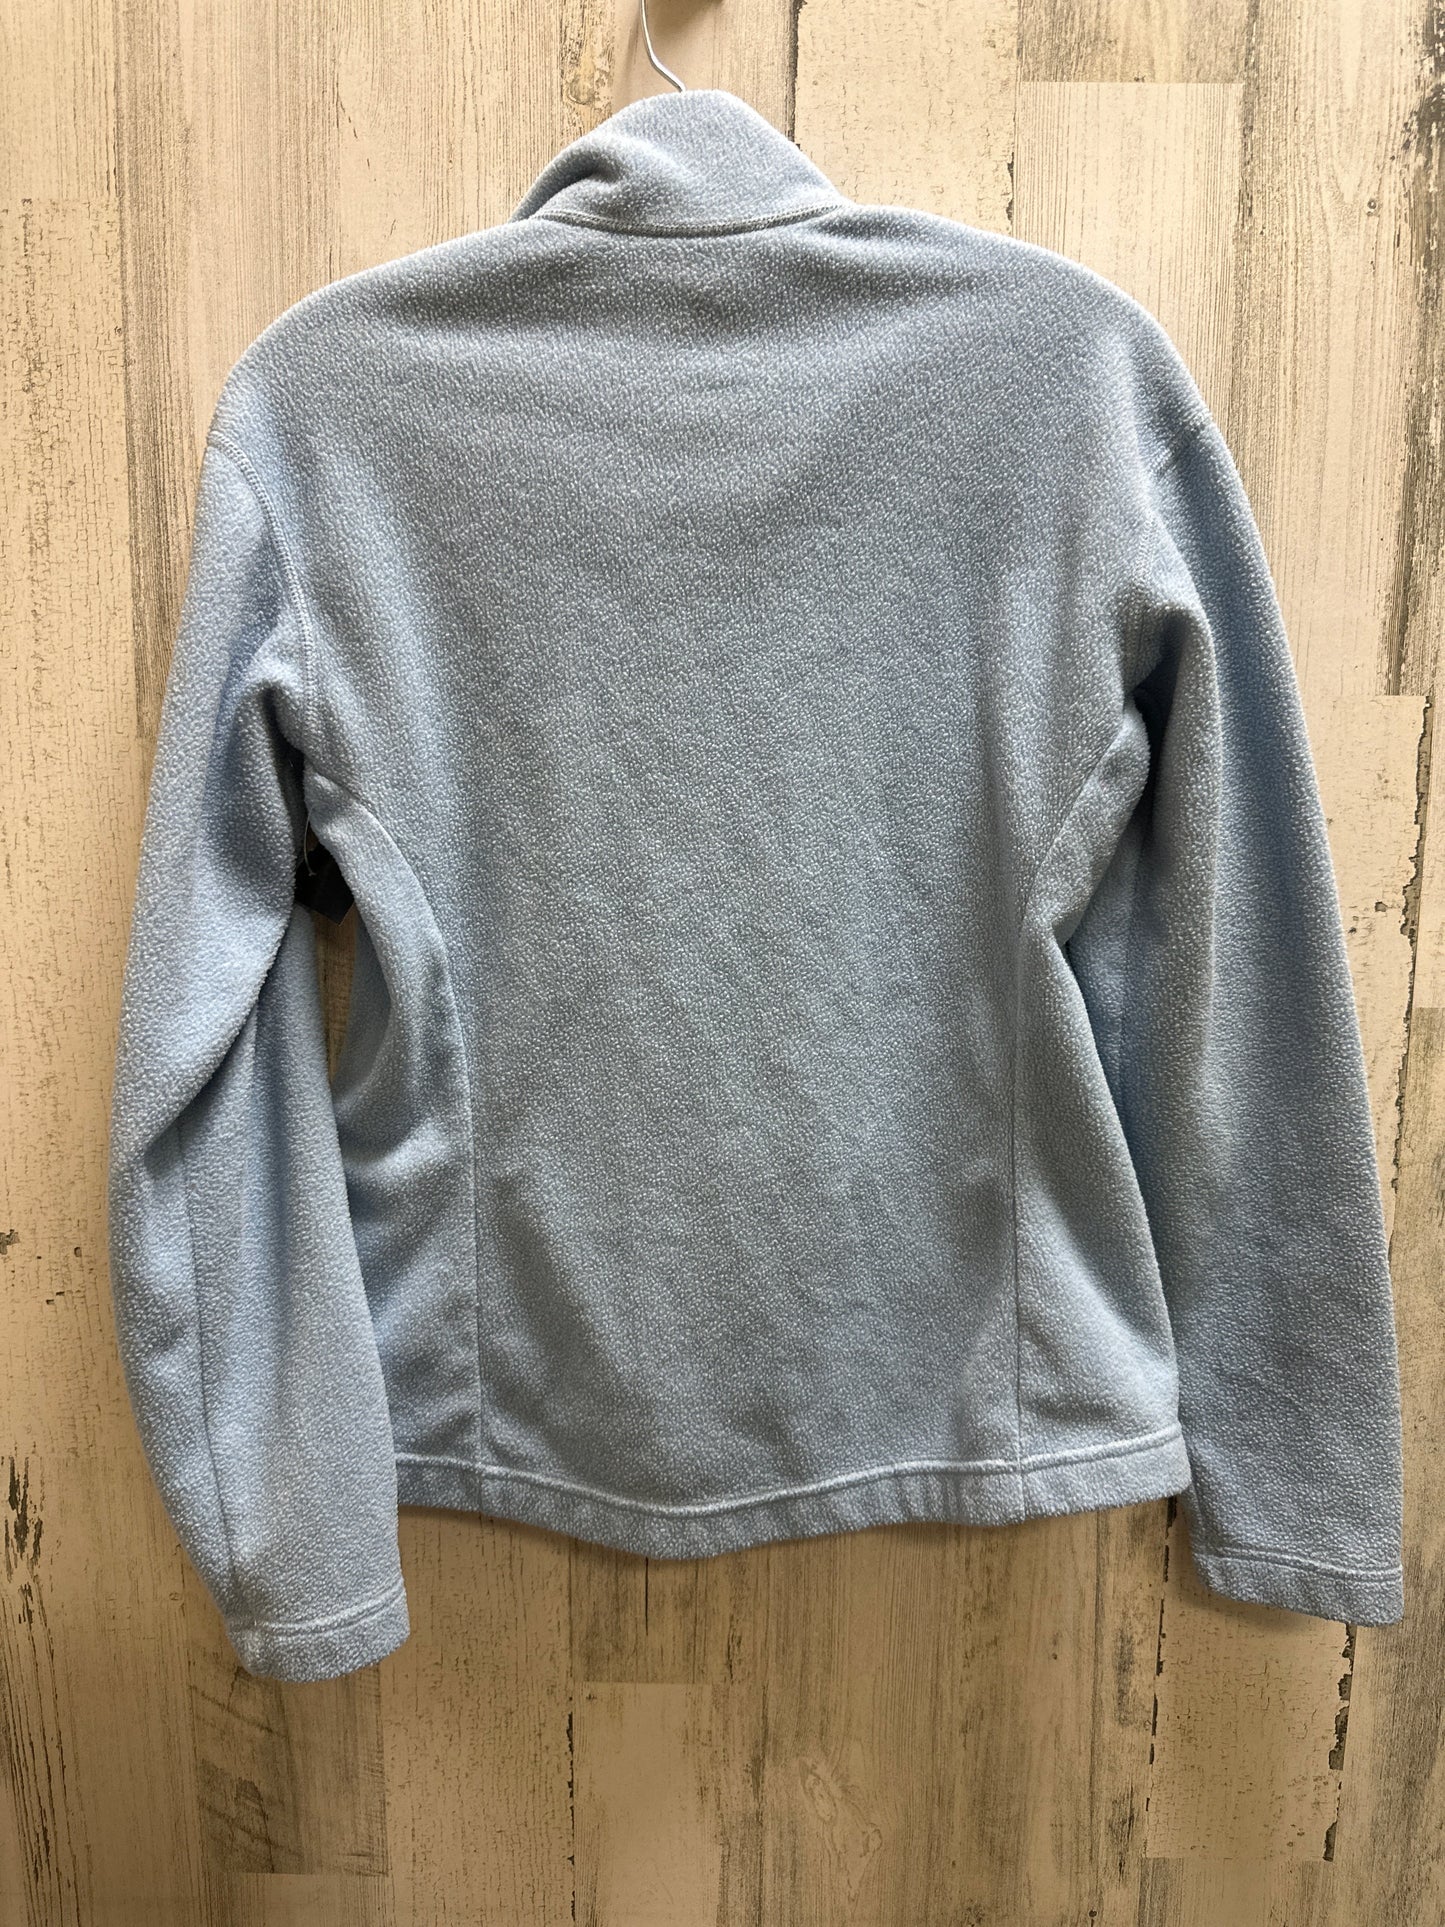 Blue Sweater Patagonia, Size S